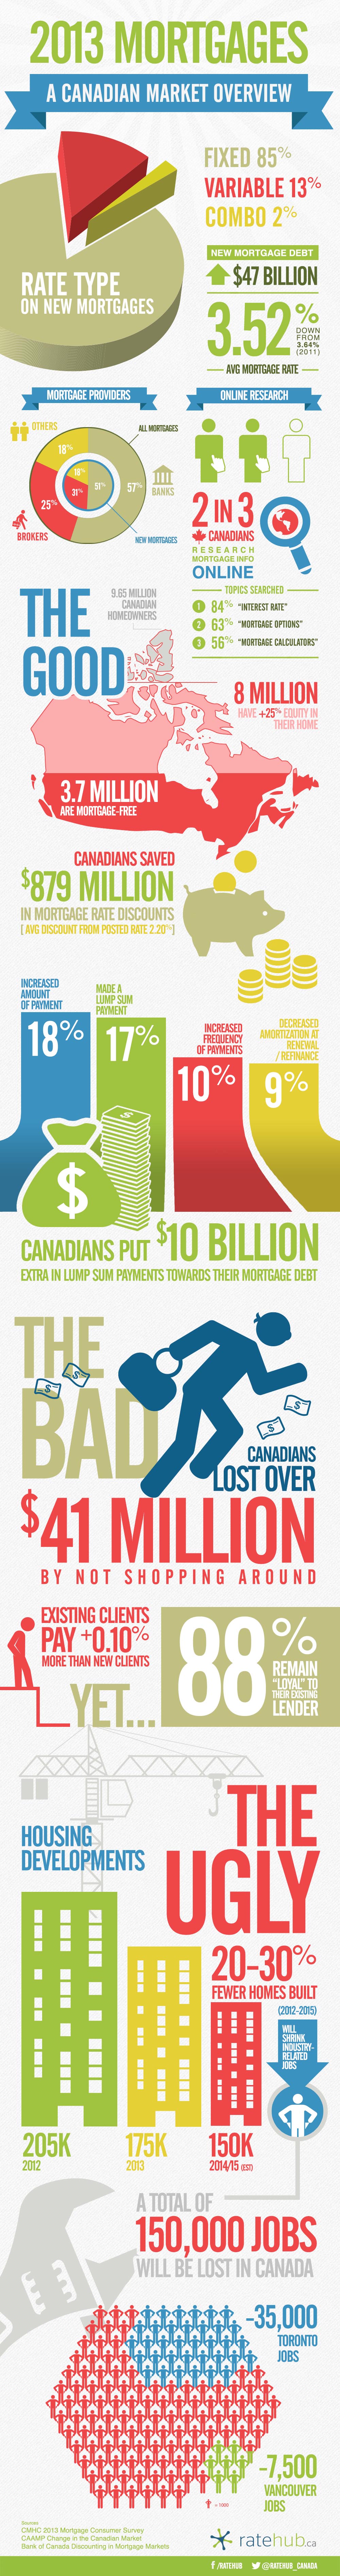 2013 Mortgages - The Good, The Bad, The Ugly